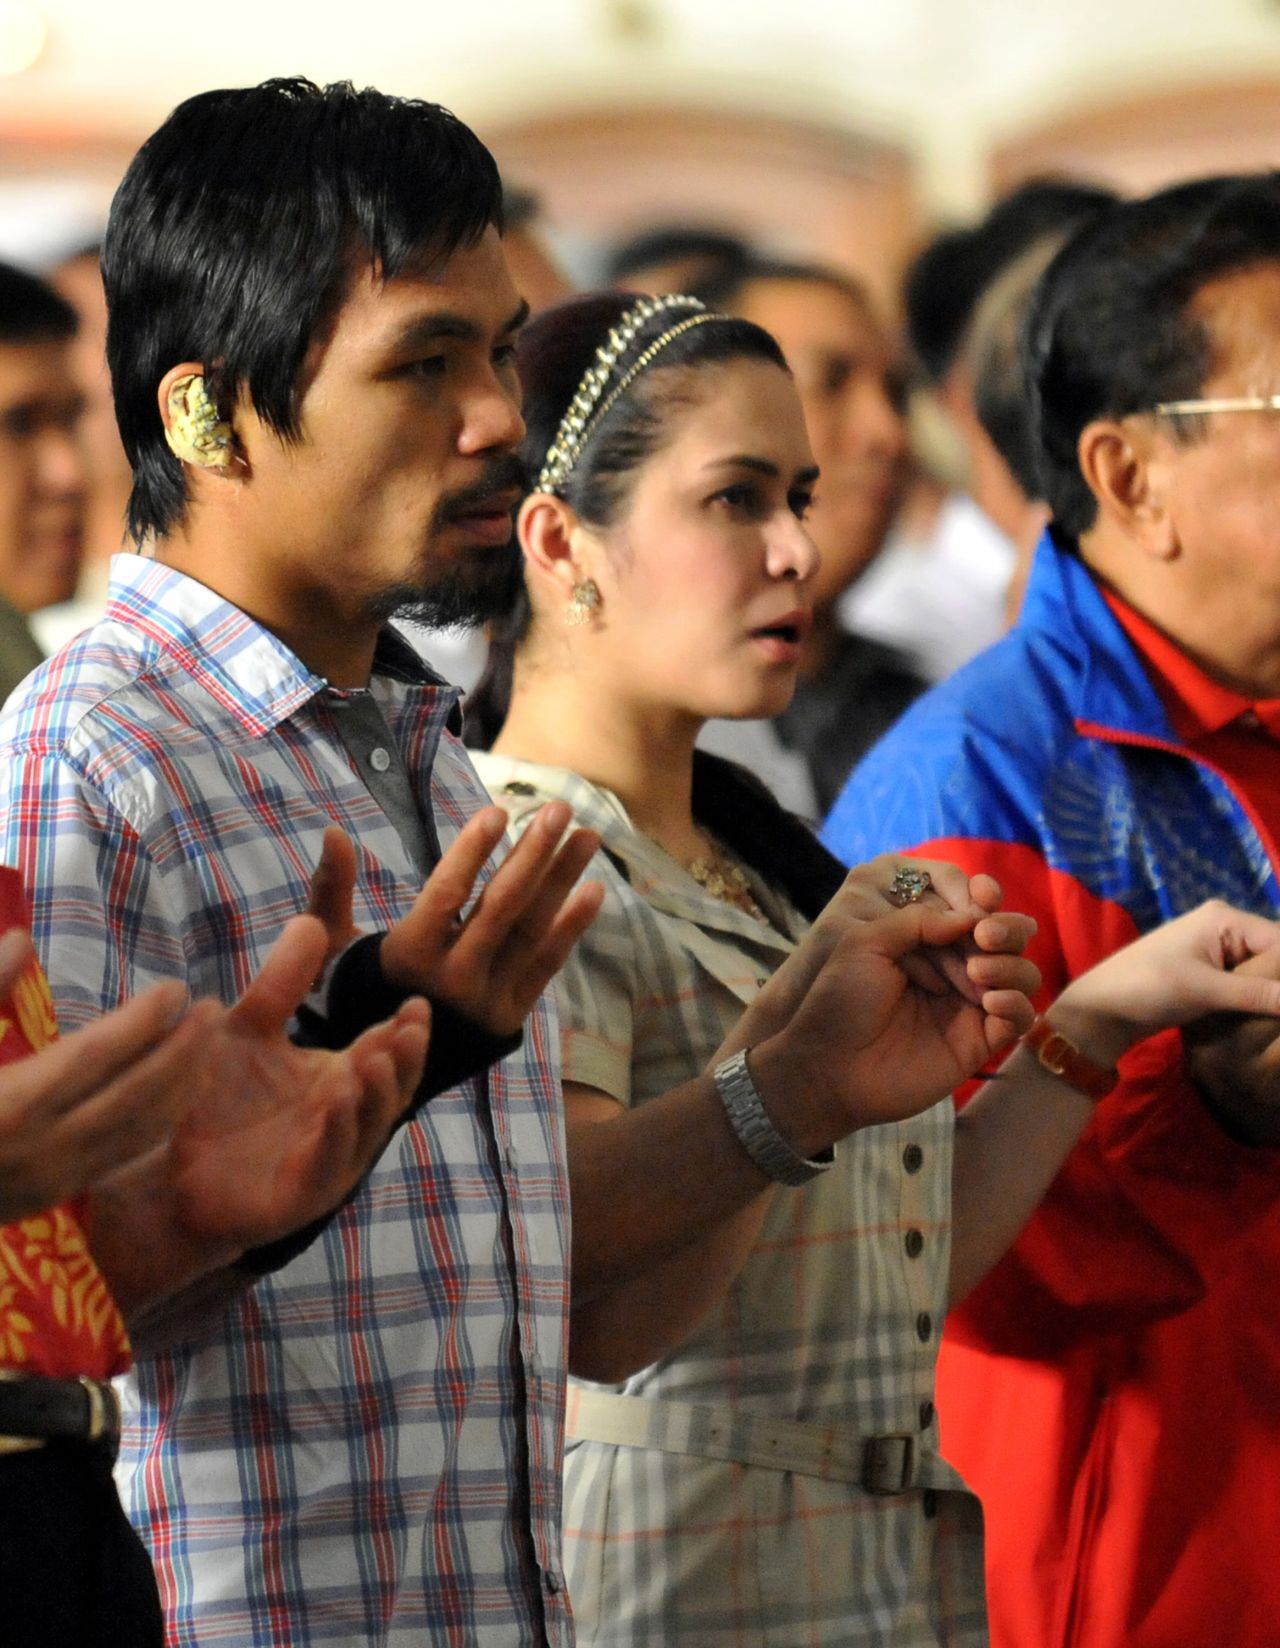 Most of Pacquiao's social media posts evoke his Christian faith and devotion to family. He is photographed with his wife Jinkee during mass in the Quiapo district of Manila on November 20, 2009. 